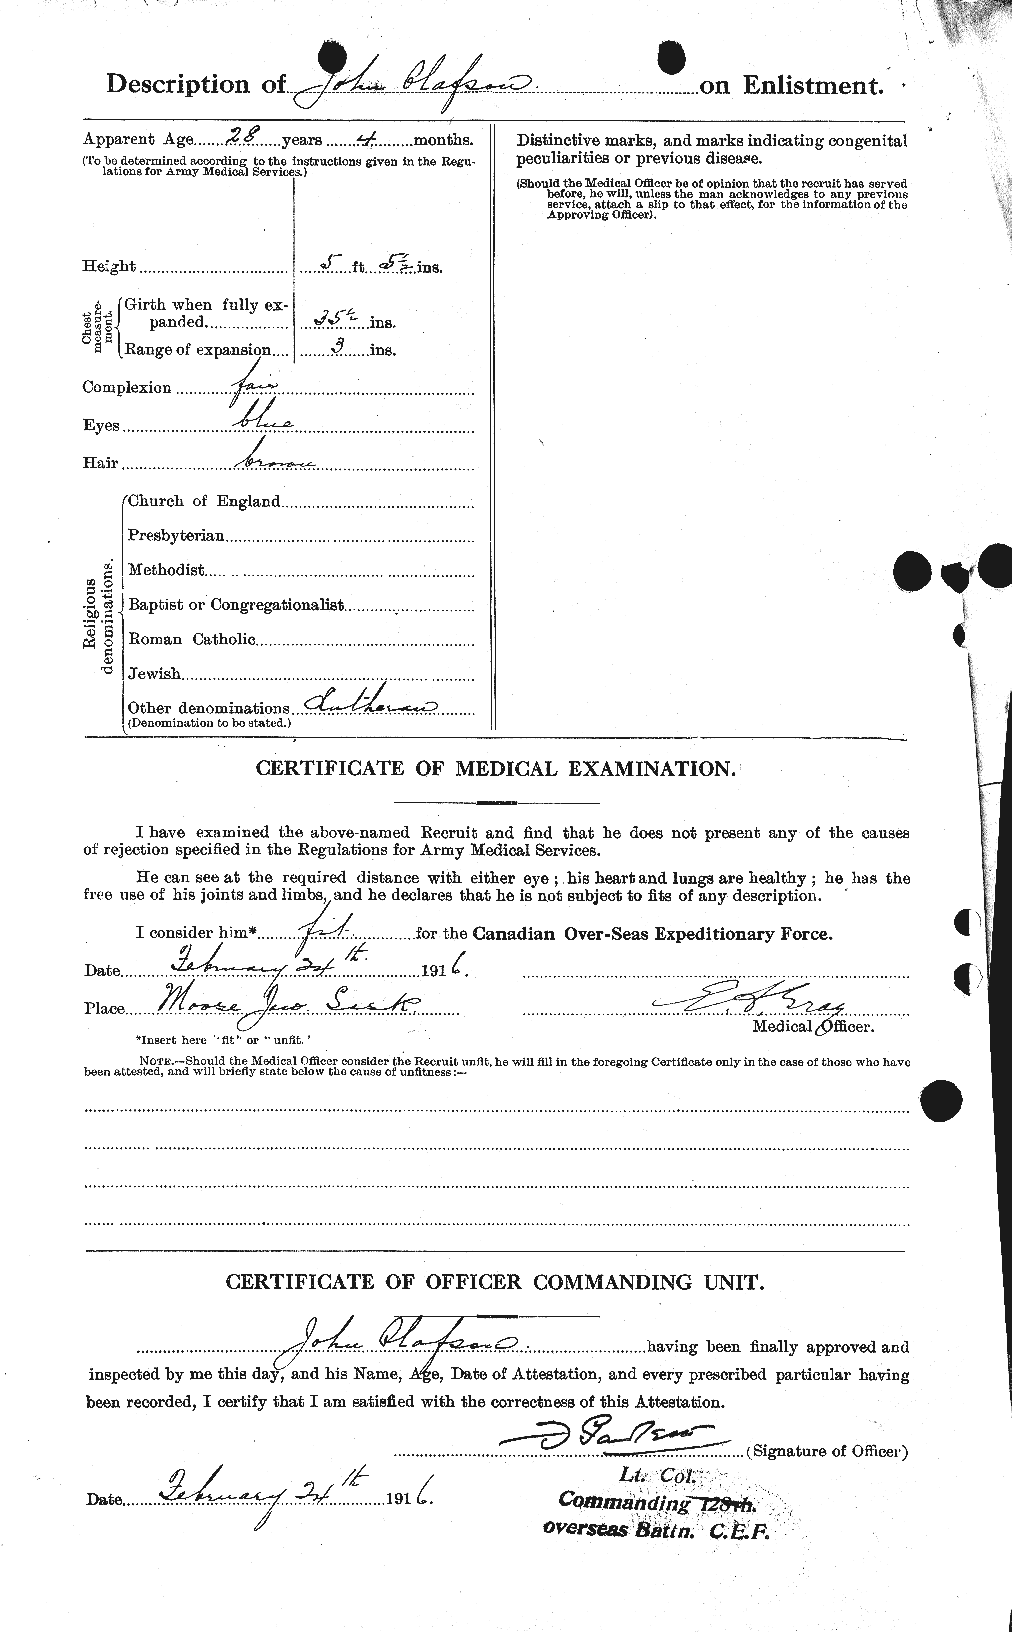 Personnel Records of the First World War - CEF 555724b